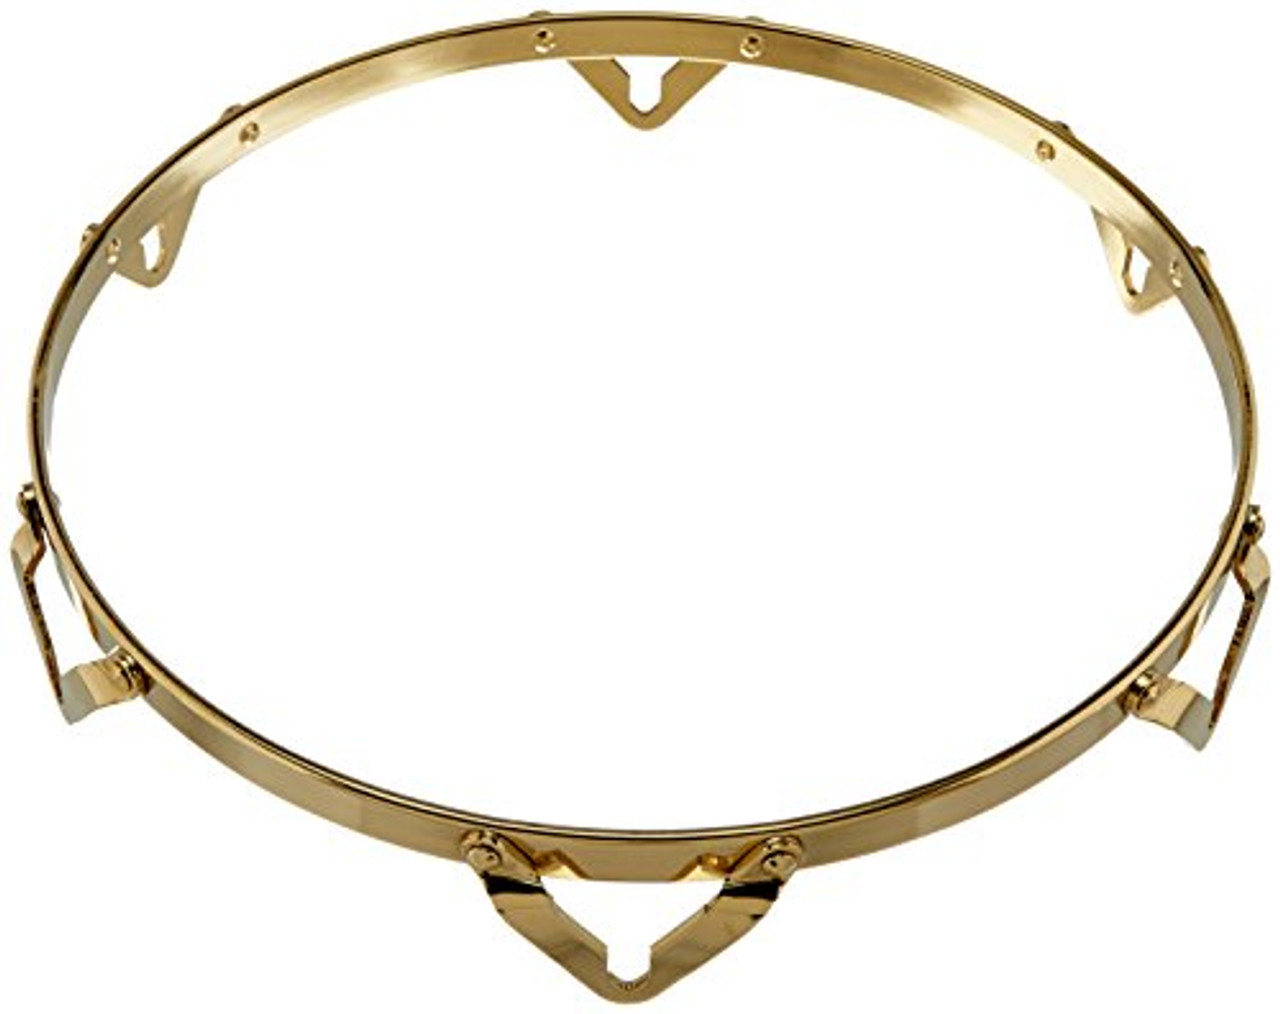 Toca a TP-38021-3/4G Traditional Conga Hoop 11-3/4 Inch Gold